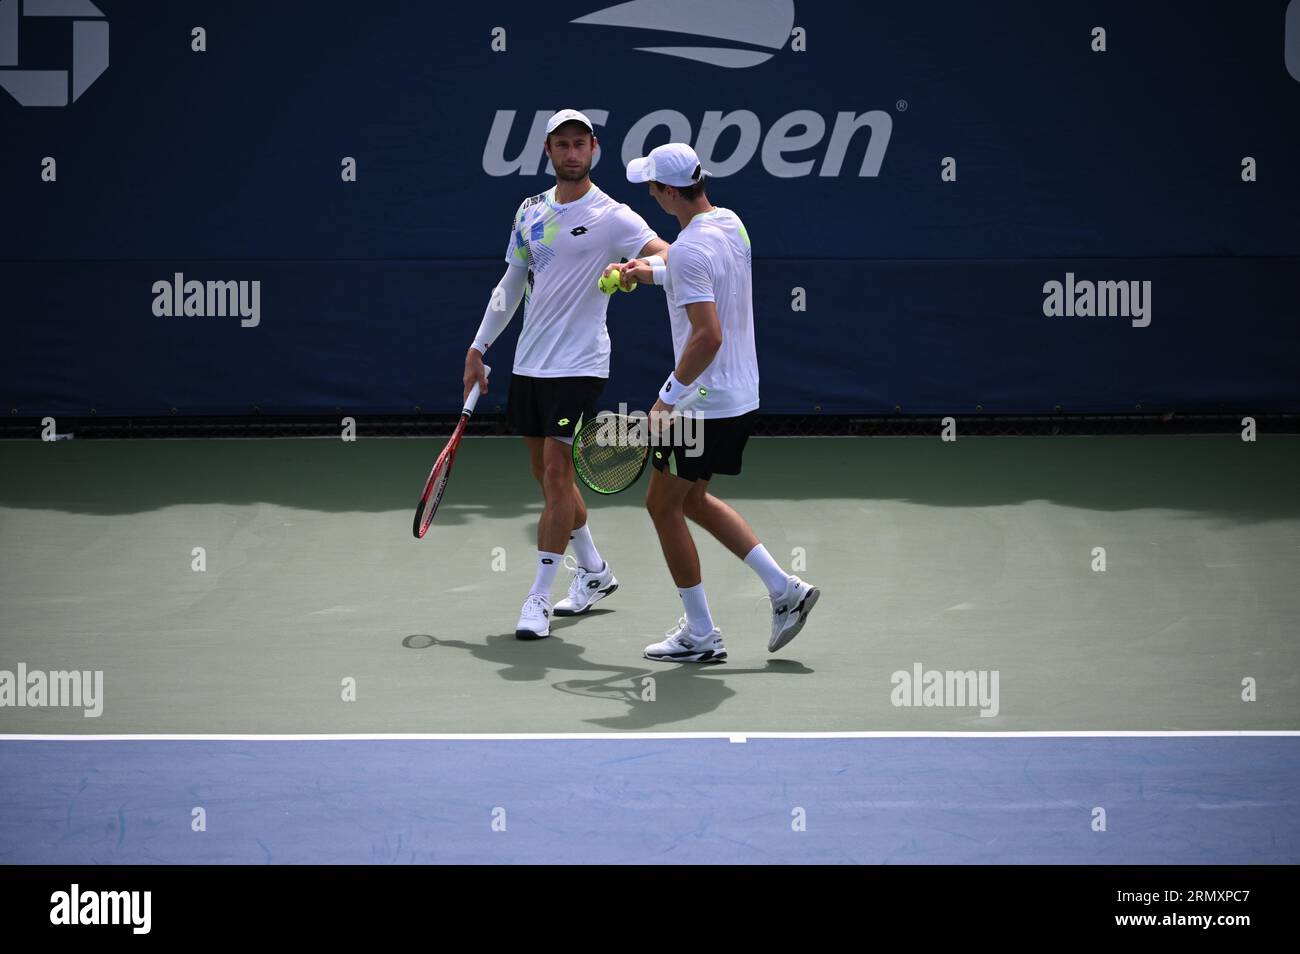 New York, United States. 30th Aug, 2023. Belgian pair Joran Vliegen and  Sander Gille pictured during a tennis match against Portugal-Brazilian pair  Cabral-Matos, in the first round of the Men's Doubles at